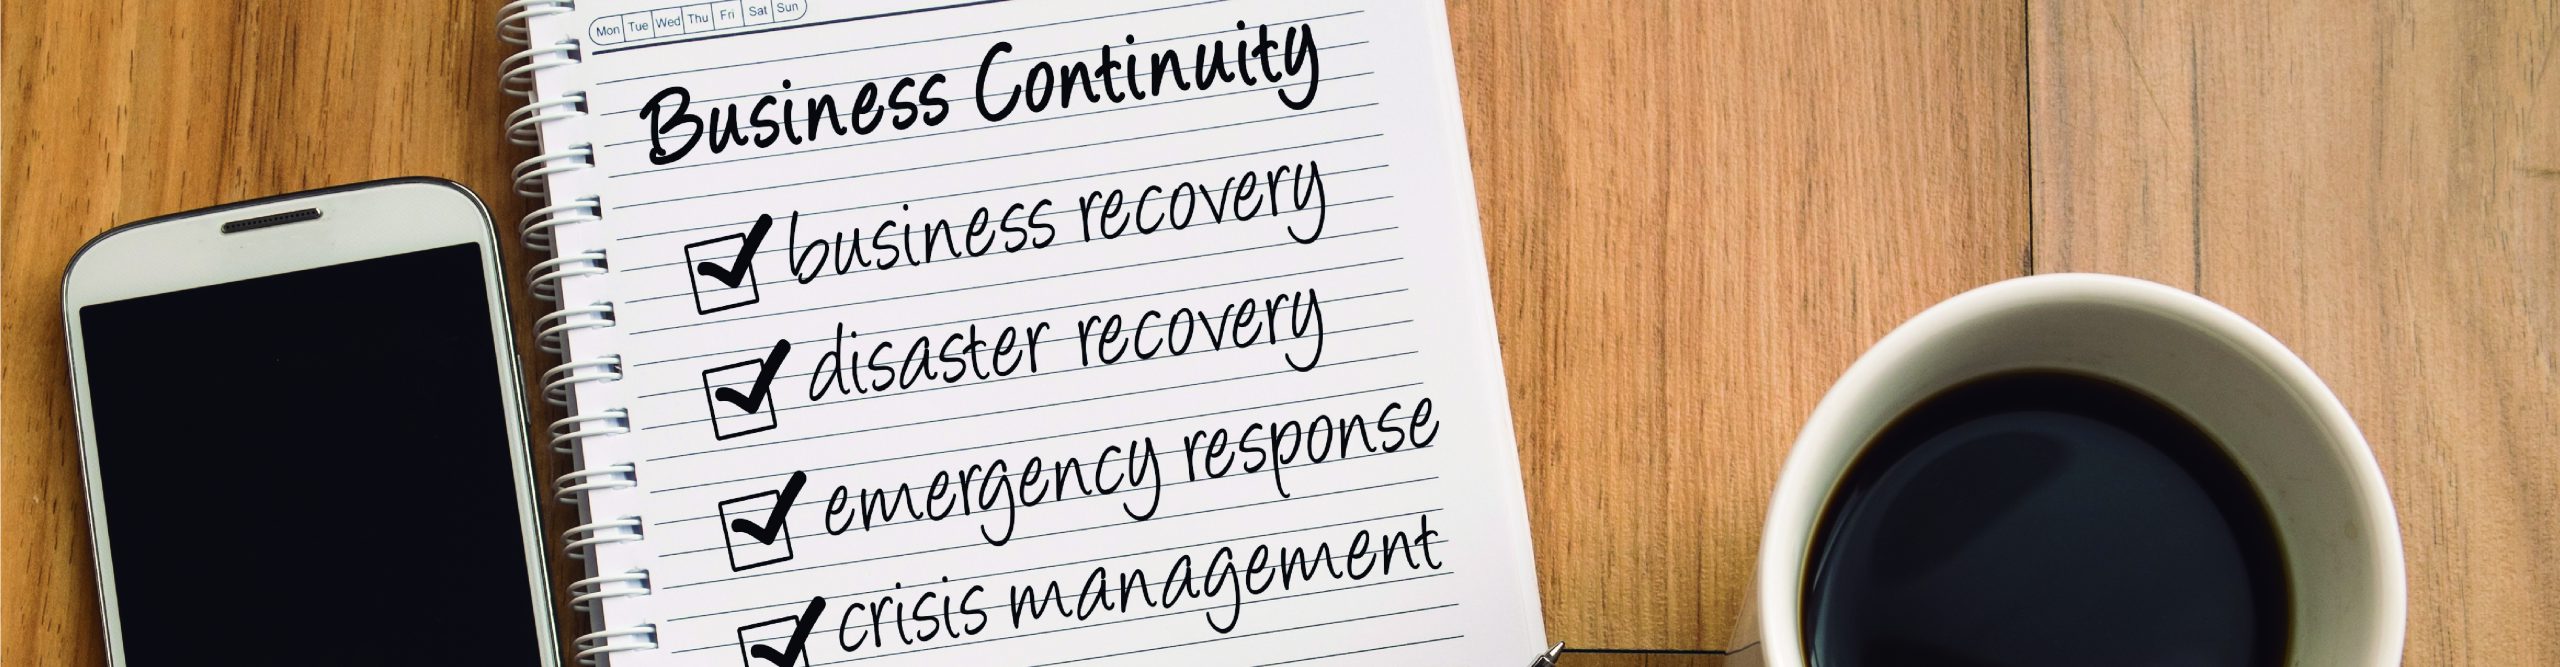 Awareness and commitment of the organization for business continuity.